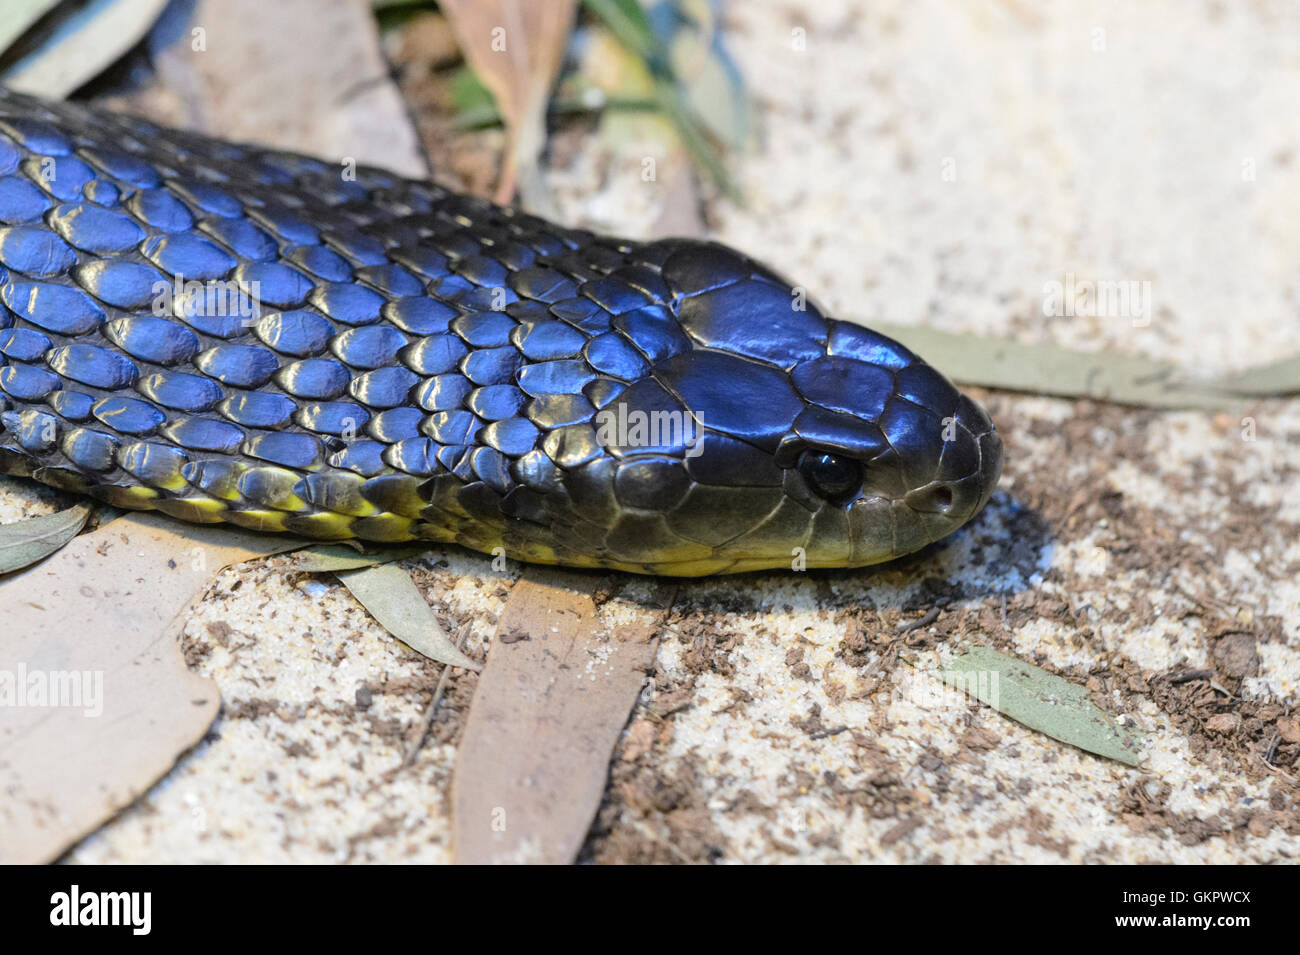 Tiger Snake (Notechis scutatus), Australia Tiger snakes are a type of venomous snake found in southern regions of Australia Stock Photo